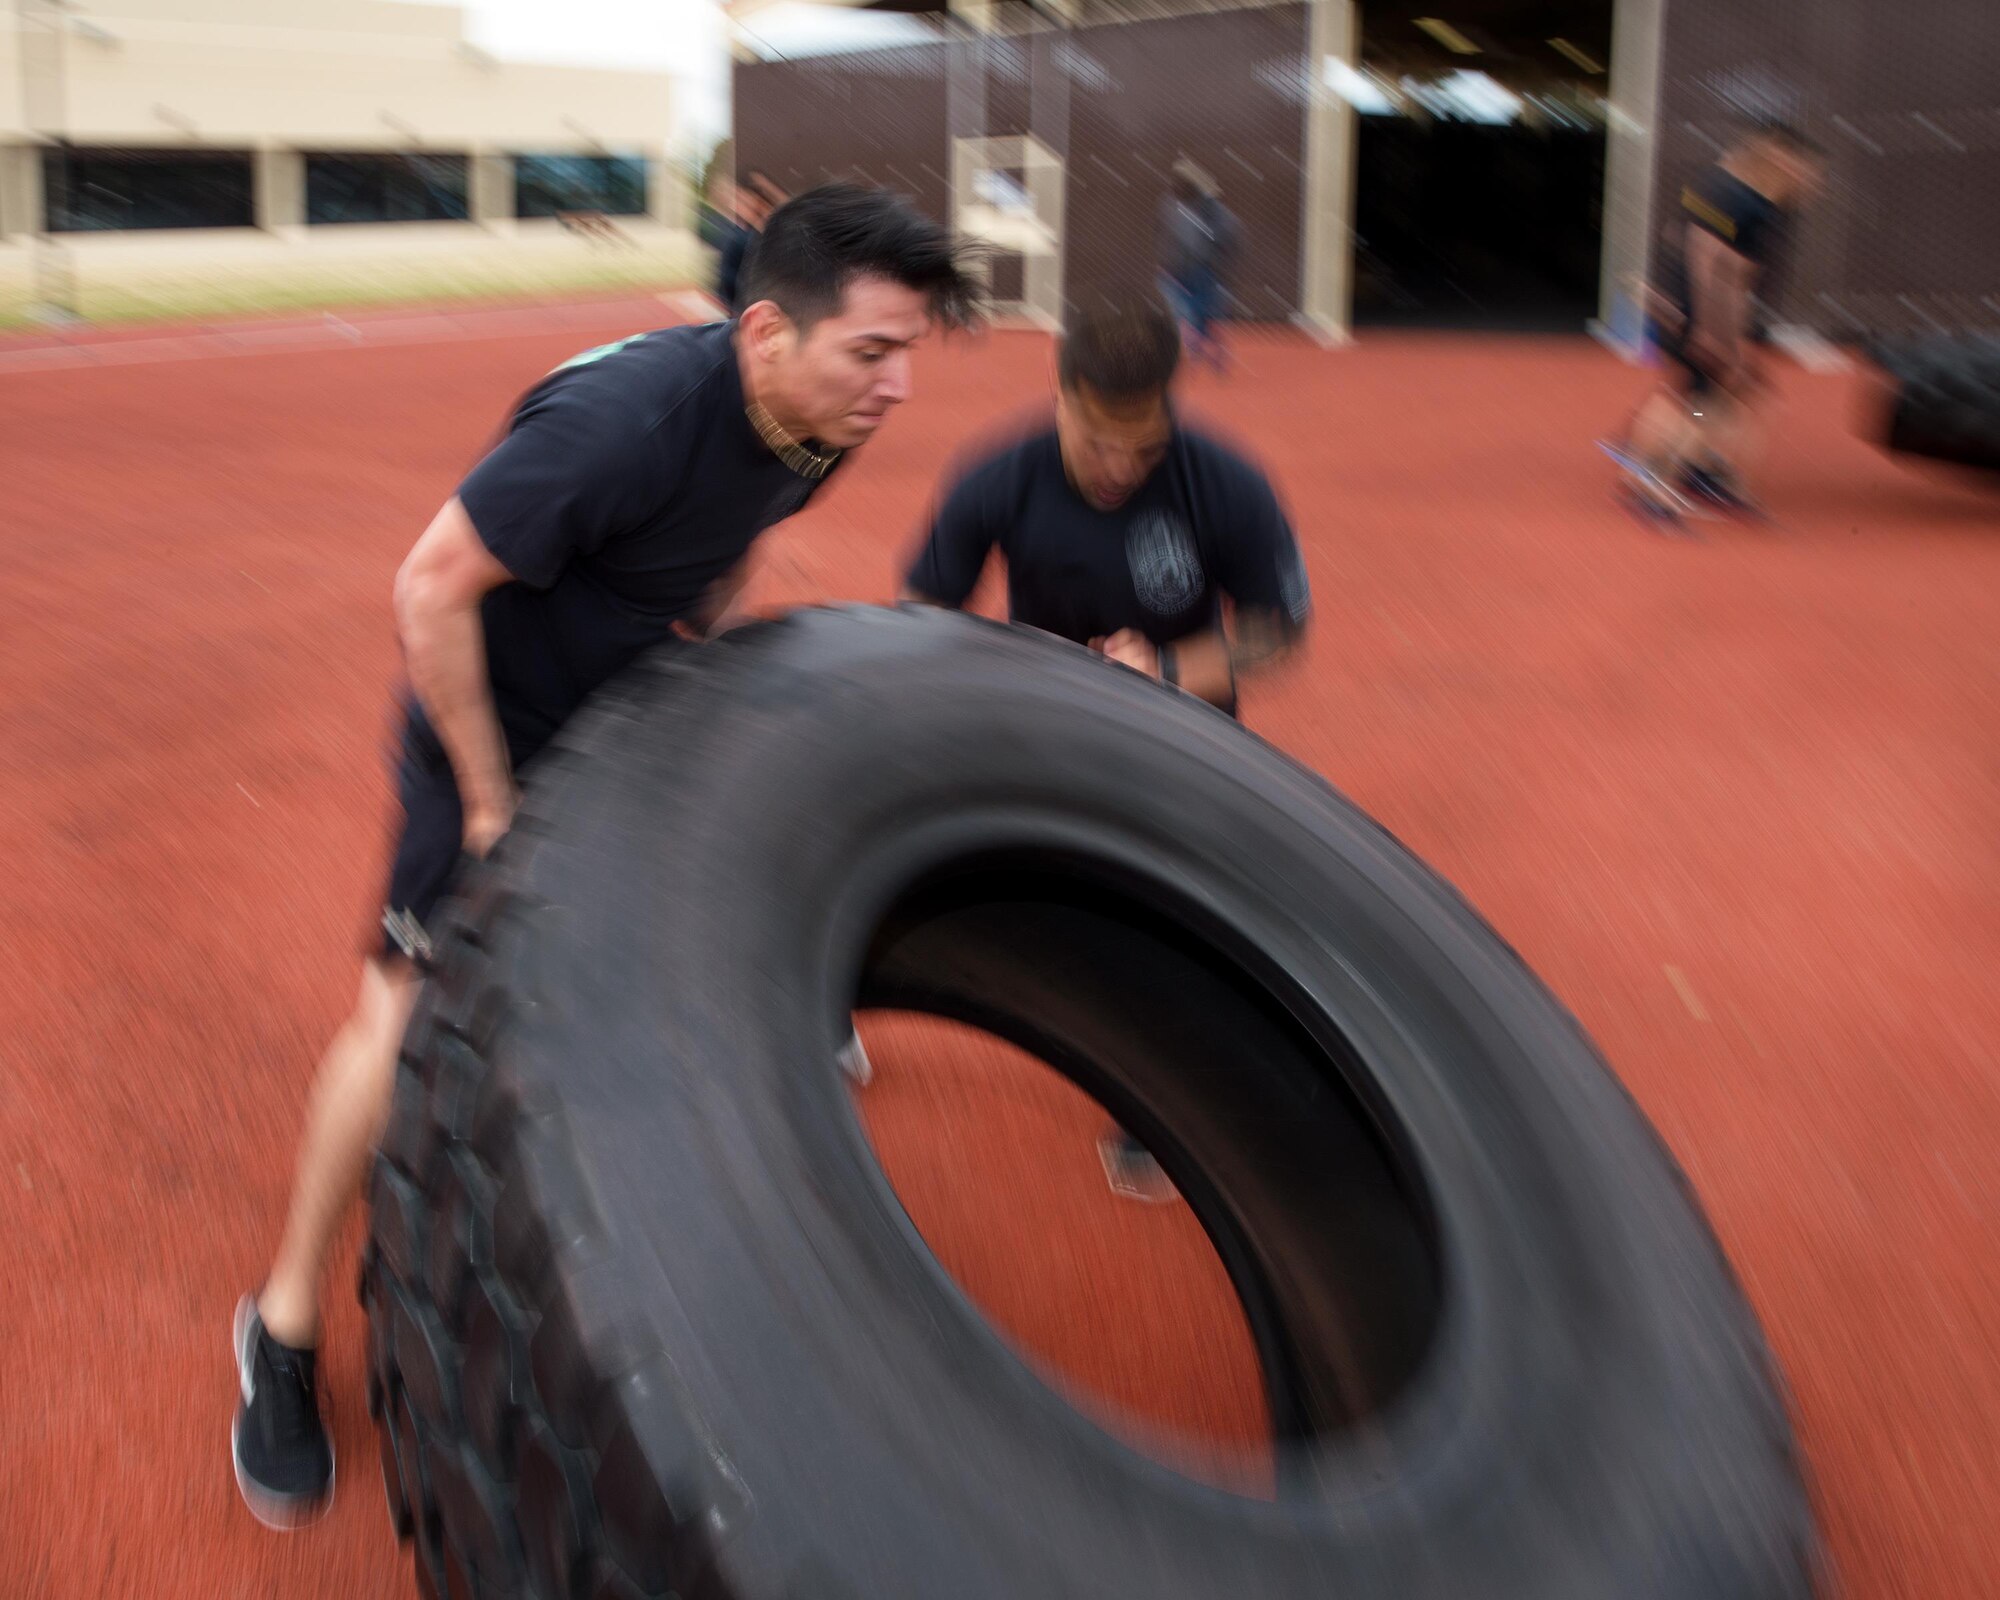 Defenders from the 60th Security Forces Squadron lift tires during the Defender’s Challenge at Travis Air Force Base, Calif., May 16, 2017. The competition is just one of several events being sponsored by the squadron in honor of Police Week. (U.S. Air Force photo by Louis Briscese)